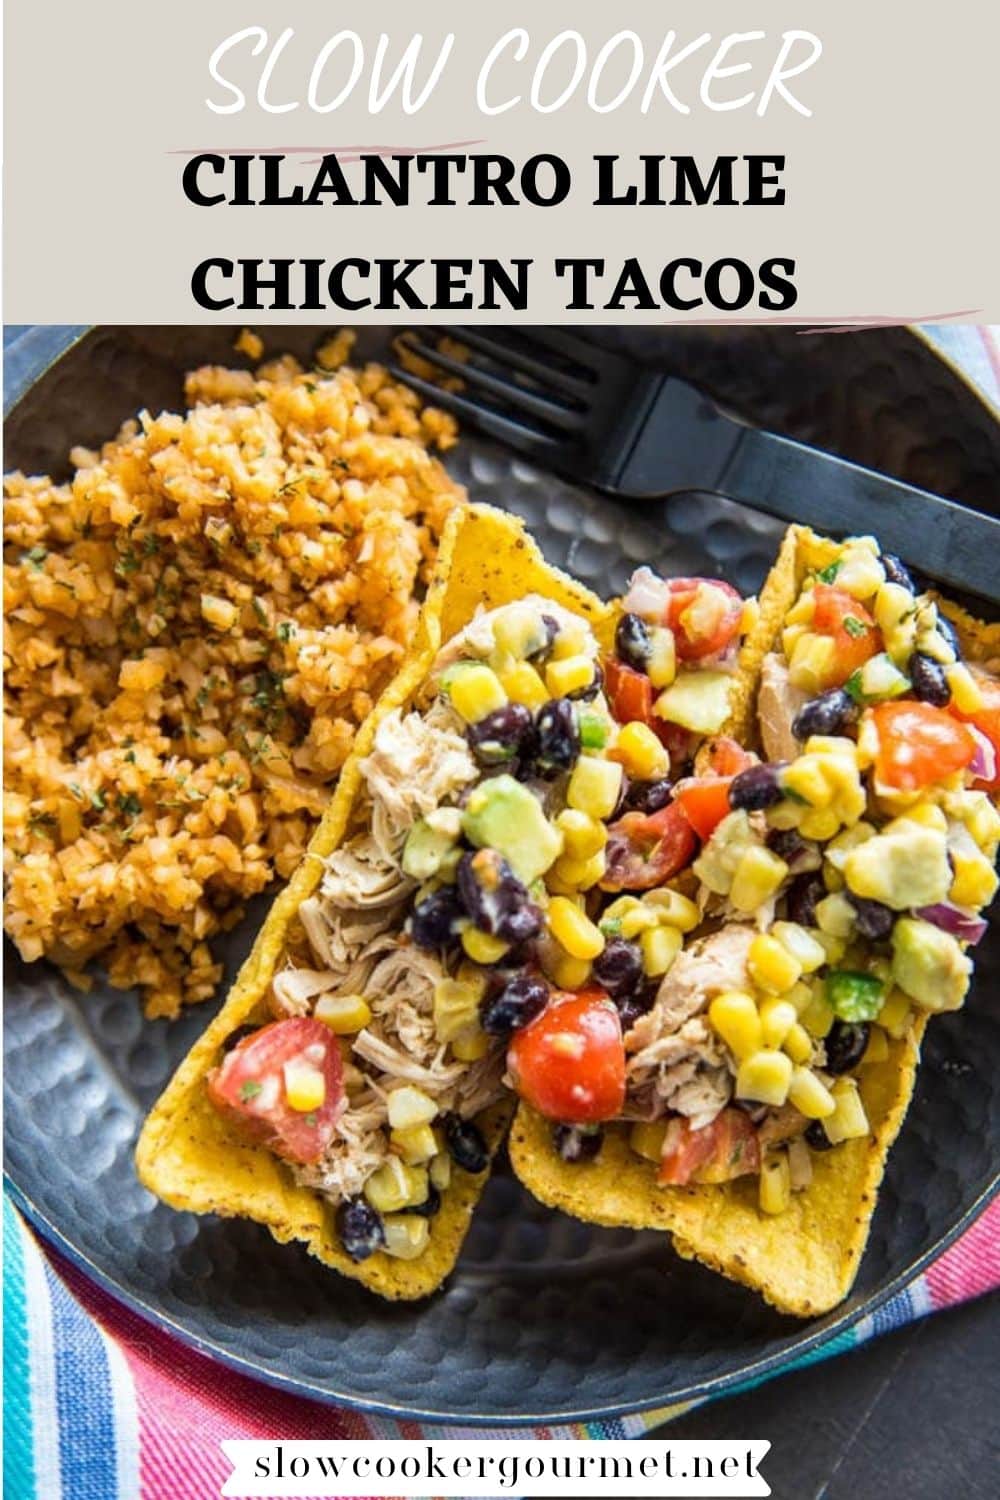 Slow Cooker Cilantro Lime Chicken Tacos - Slow Cooker Gourmet